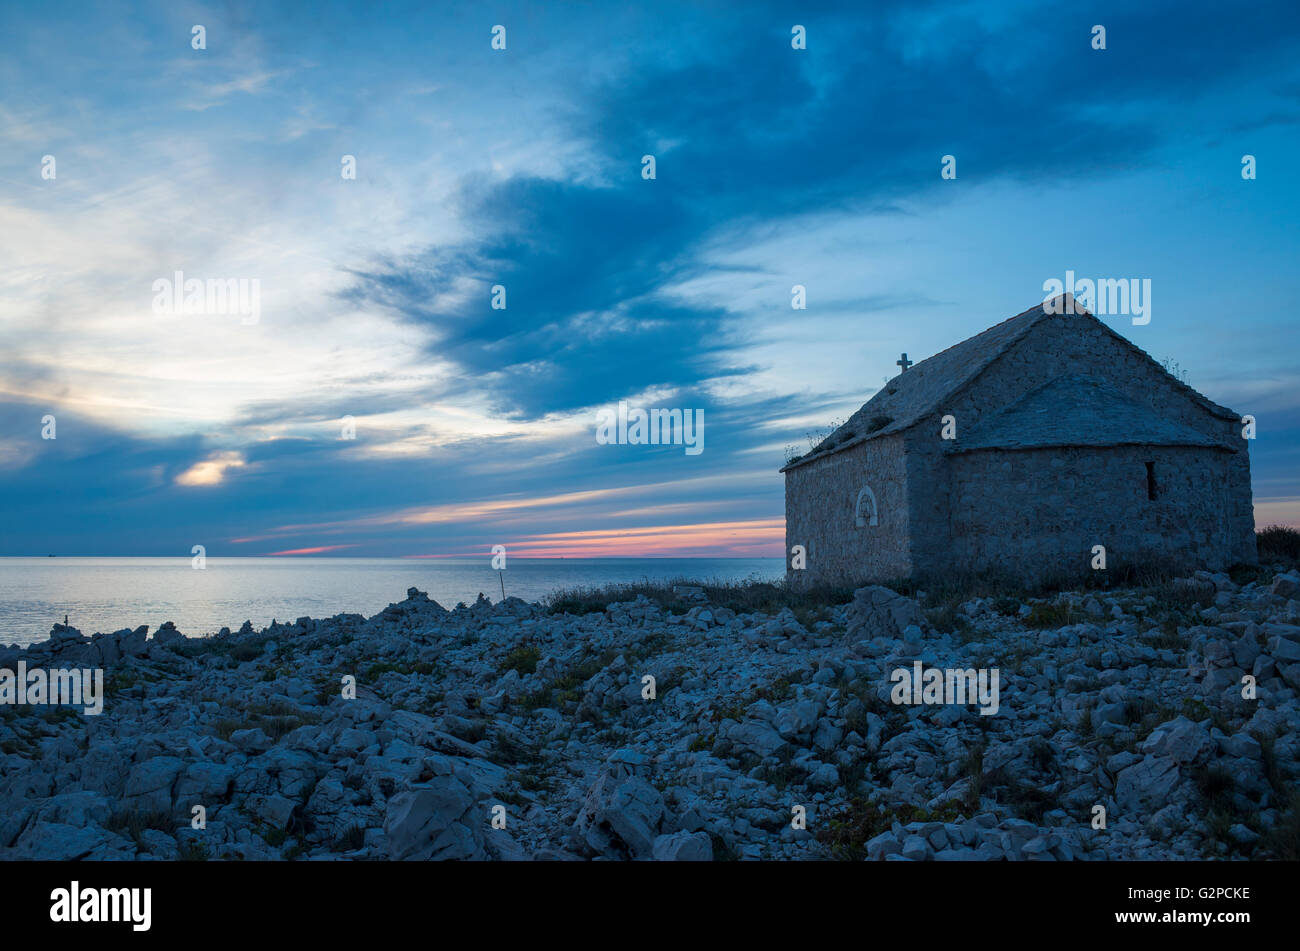 Razanj Croatia Europe. Landscape and nature photo. Adriatic Sea at dawn after sunset. Calm warm summer evening and a small church. Stock Photo